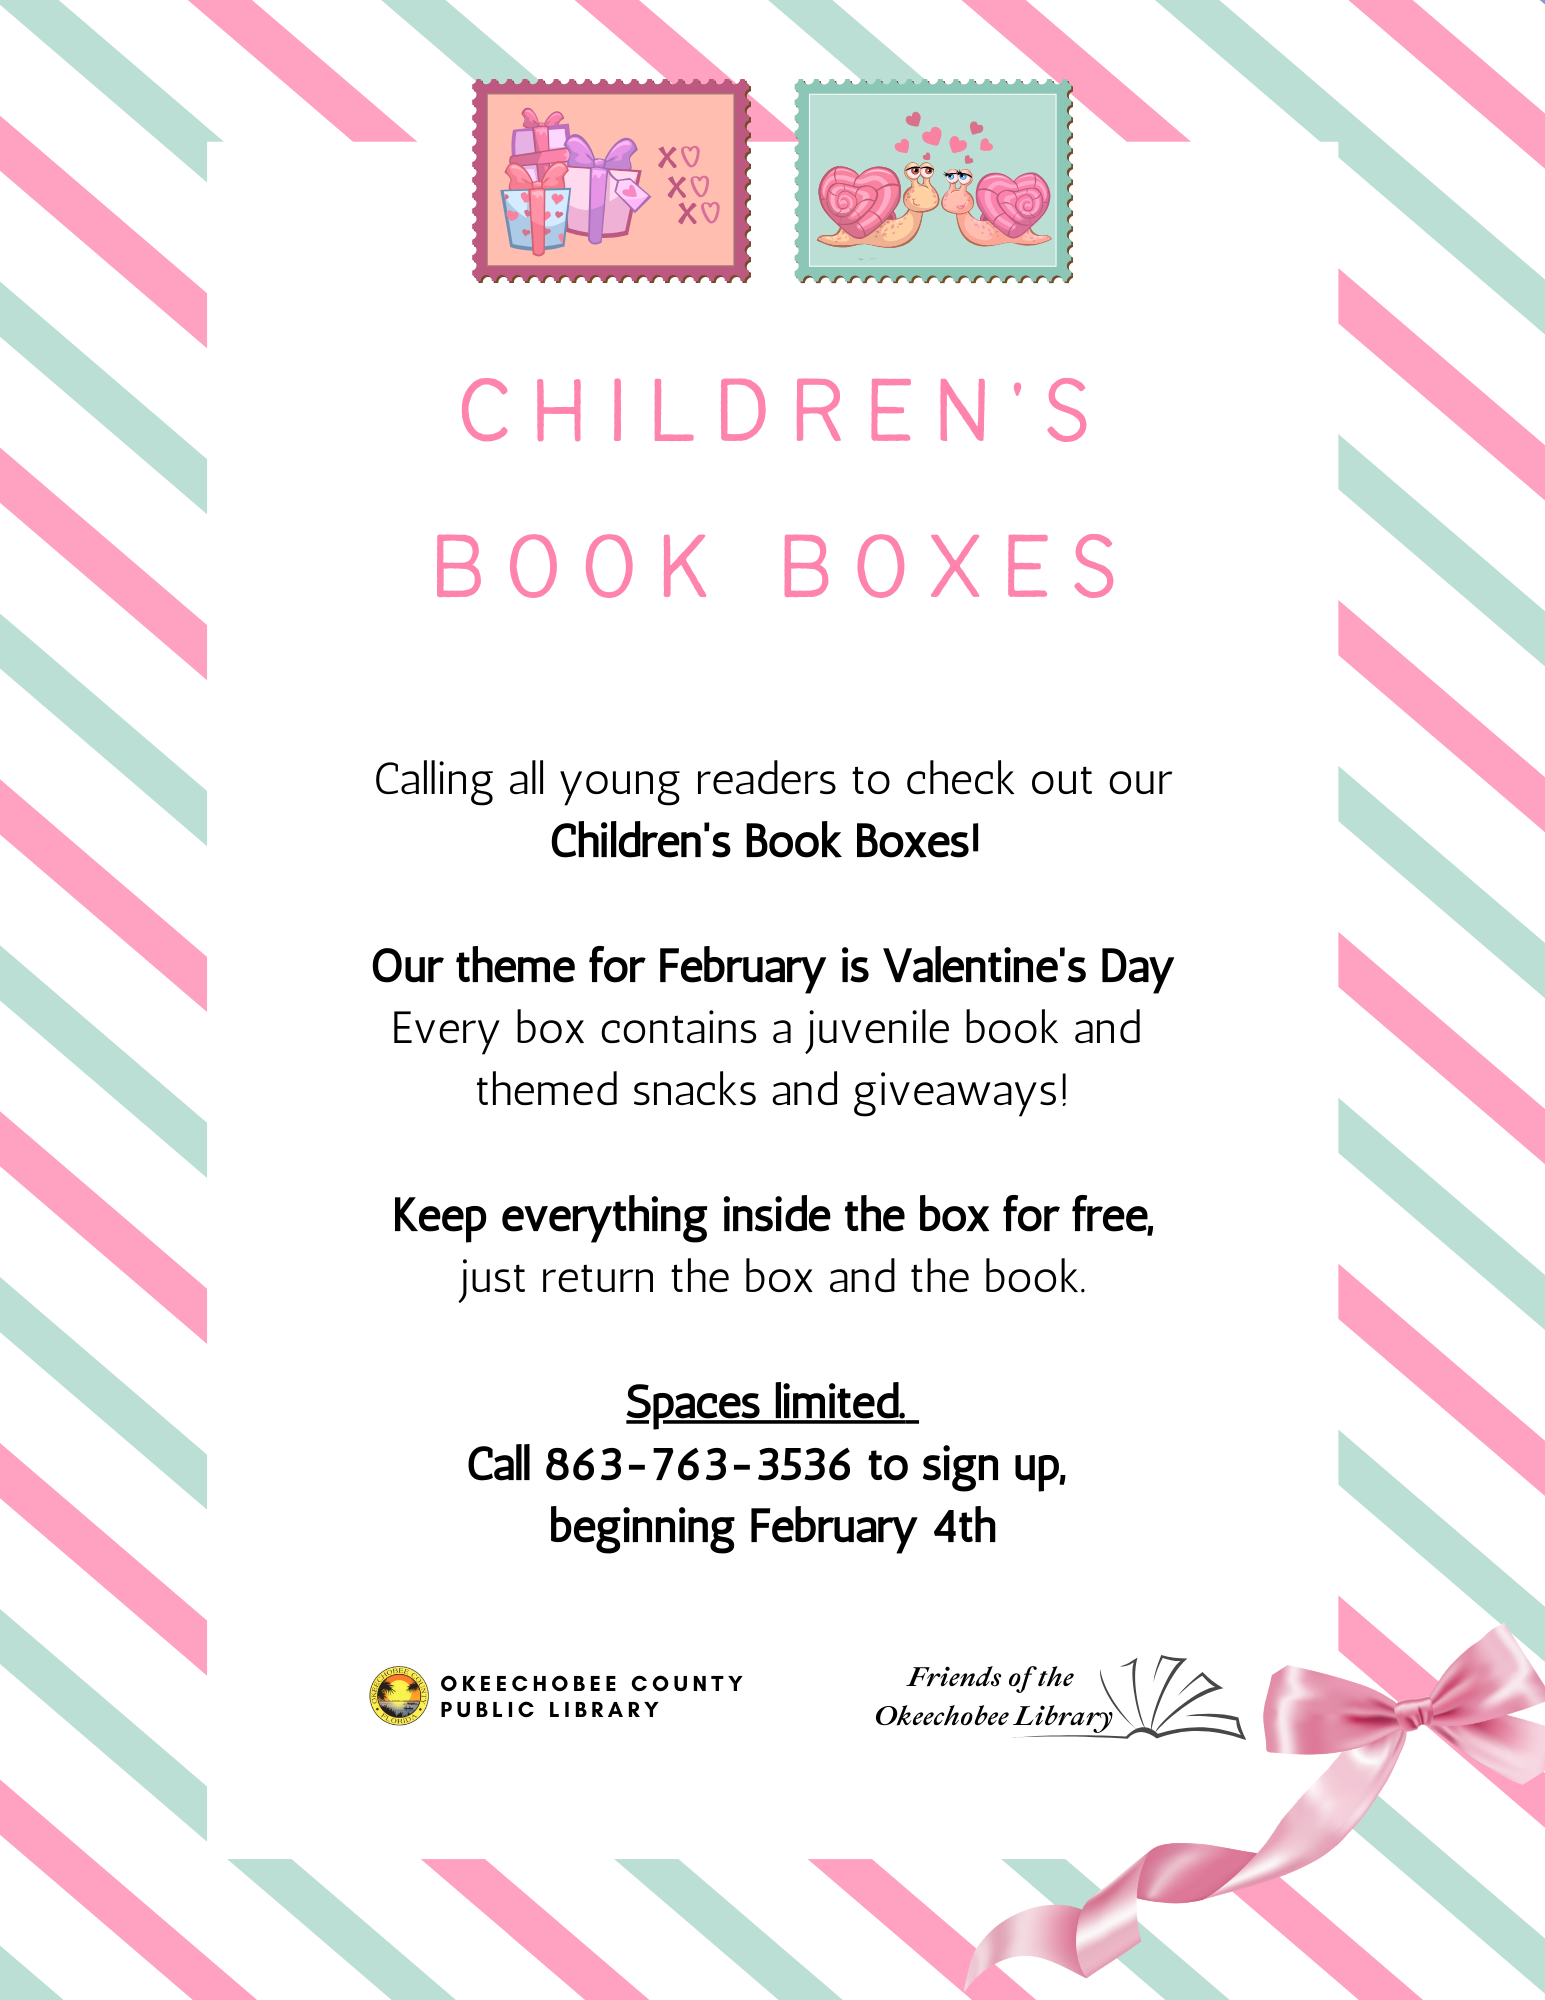 February Children's Book Boxes! Every box contains a juvenile book and themed snacks and giveaways!